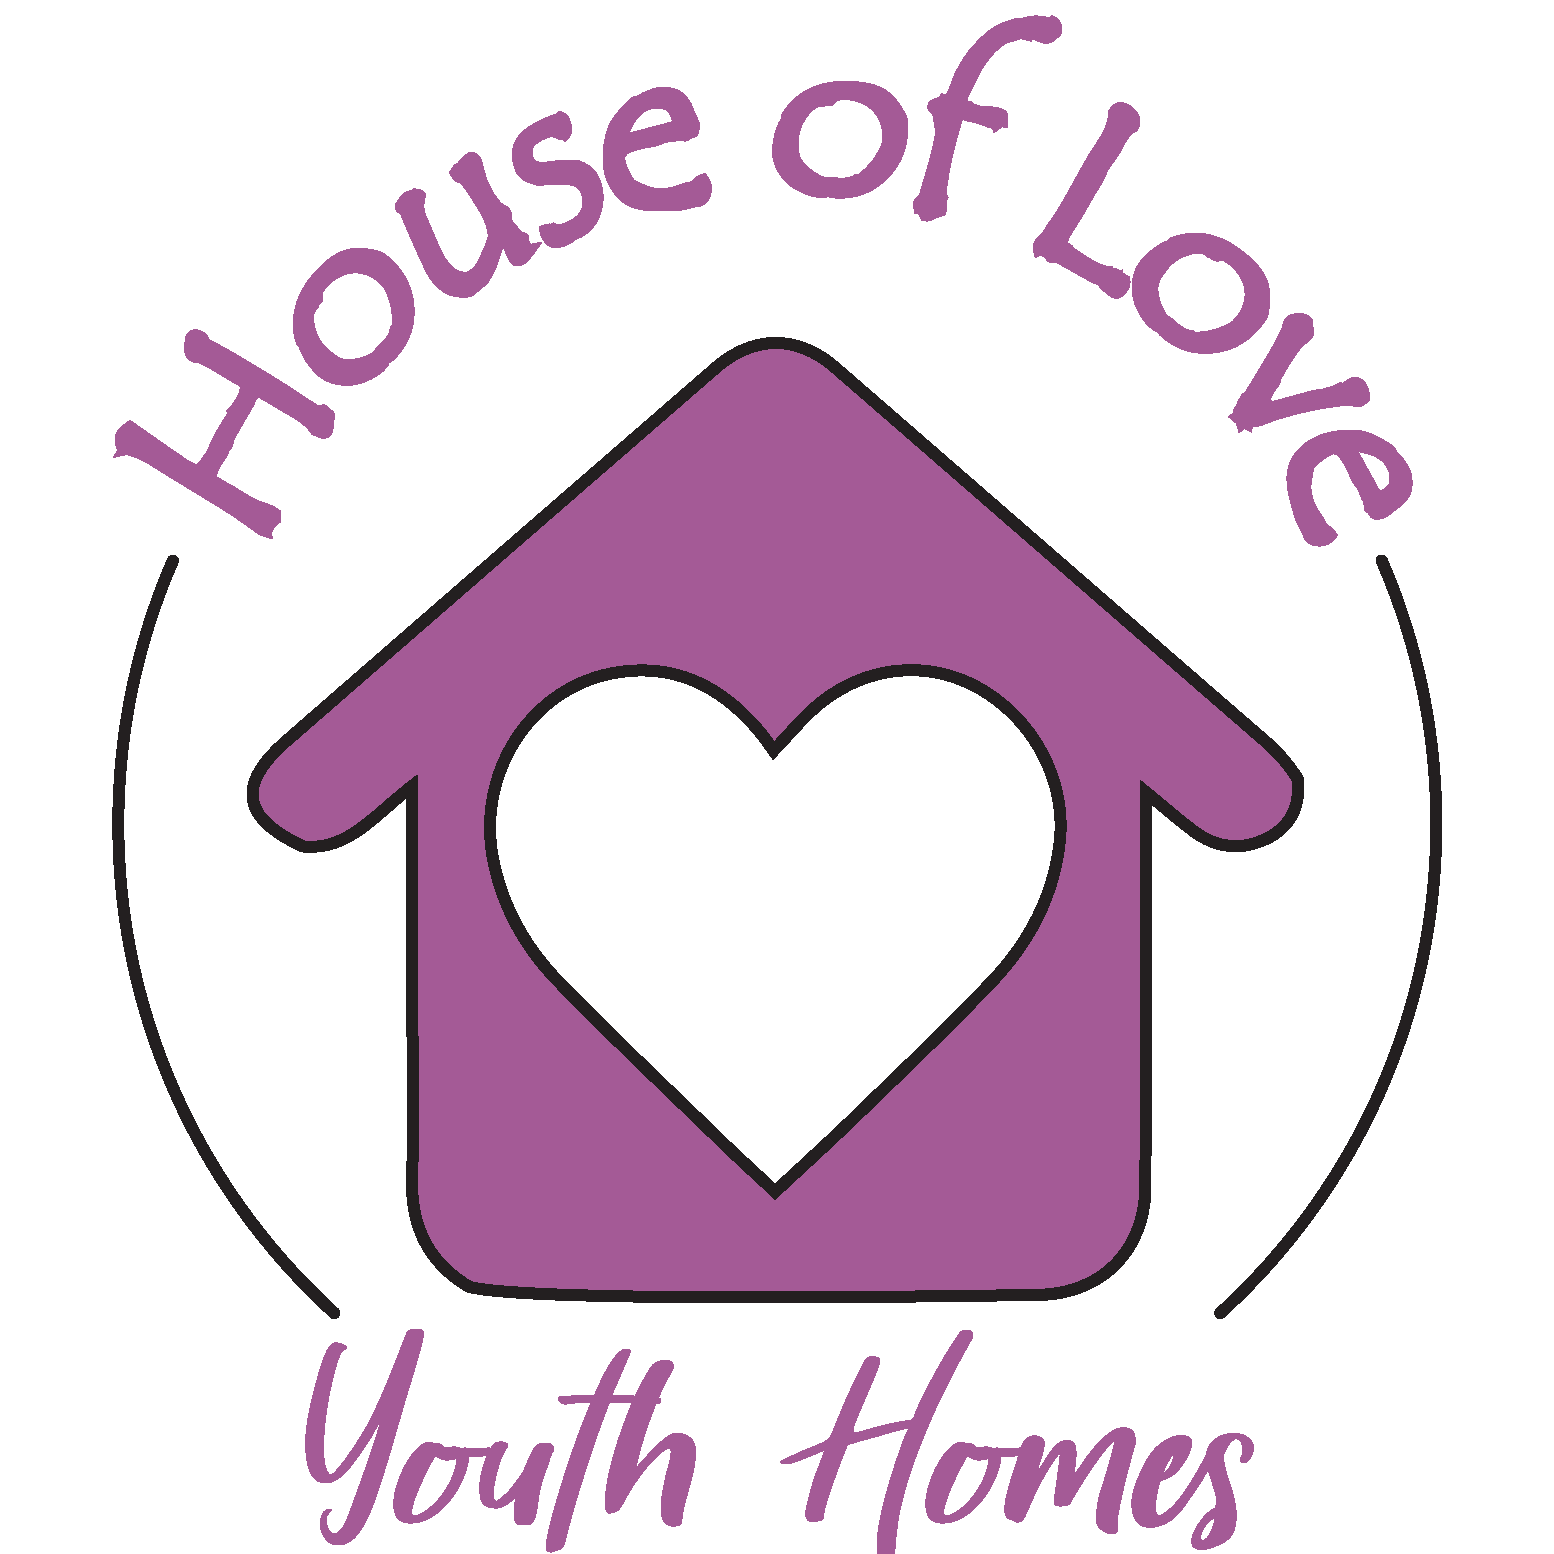 House of Love - Youth Homes